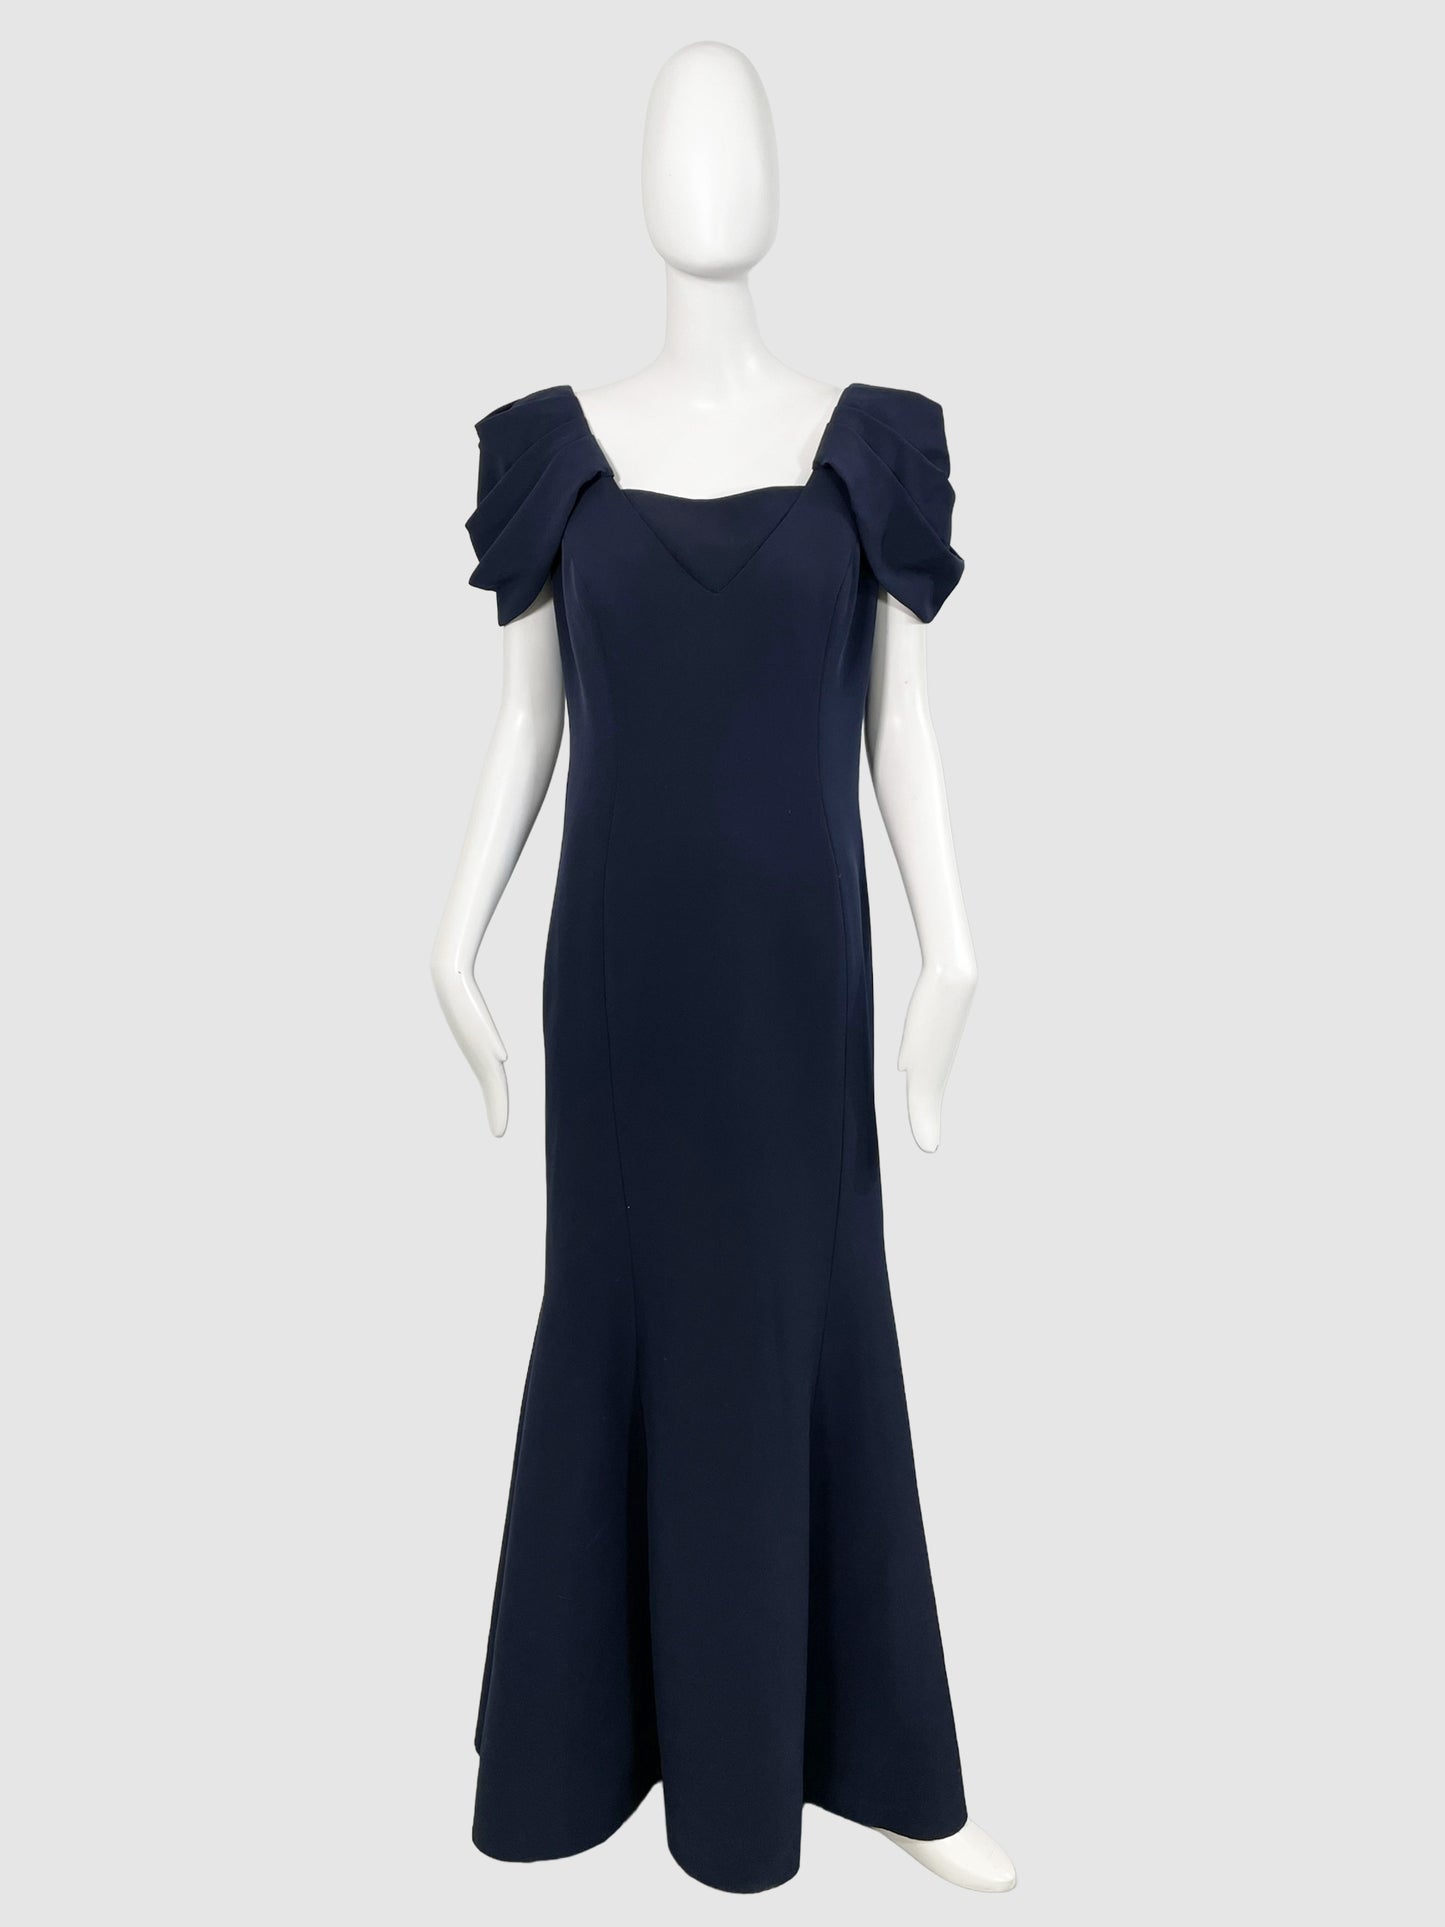 Alexander by Daymor Draped Gown - Size 12